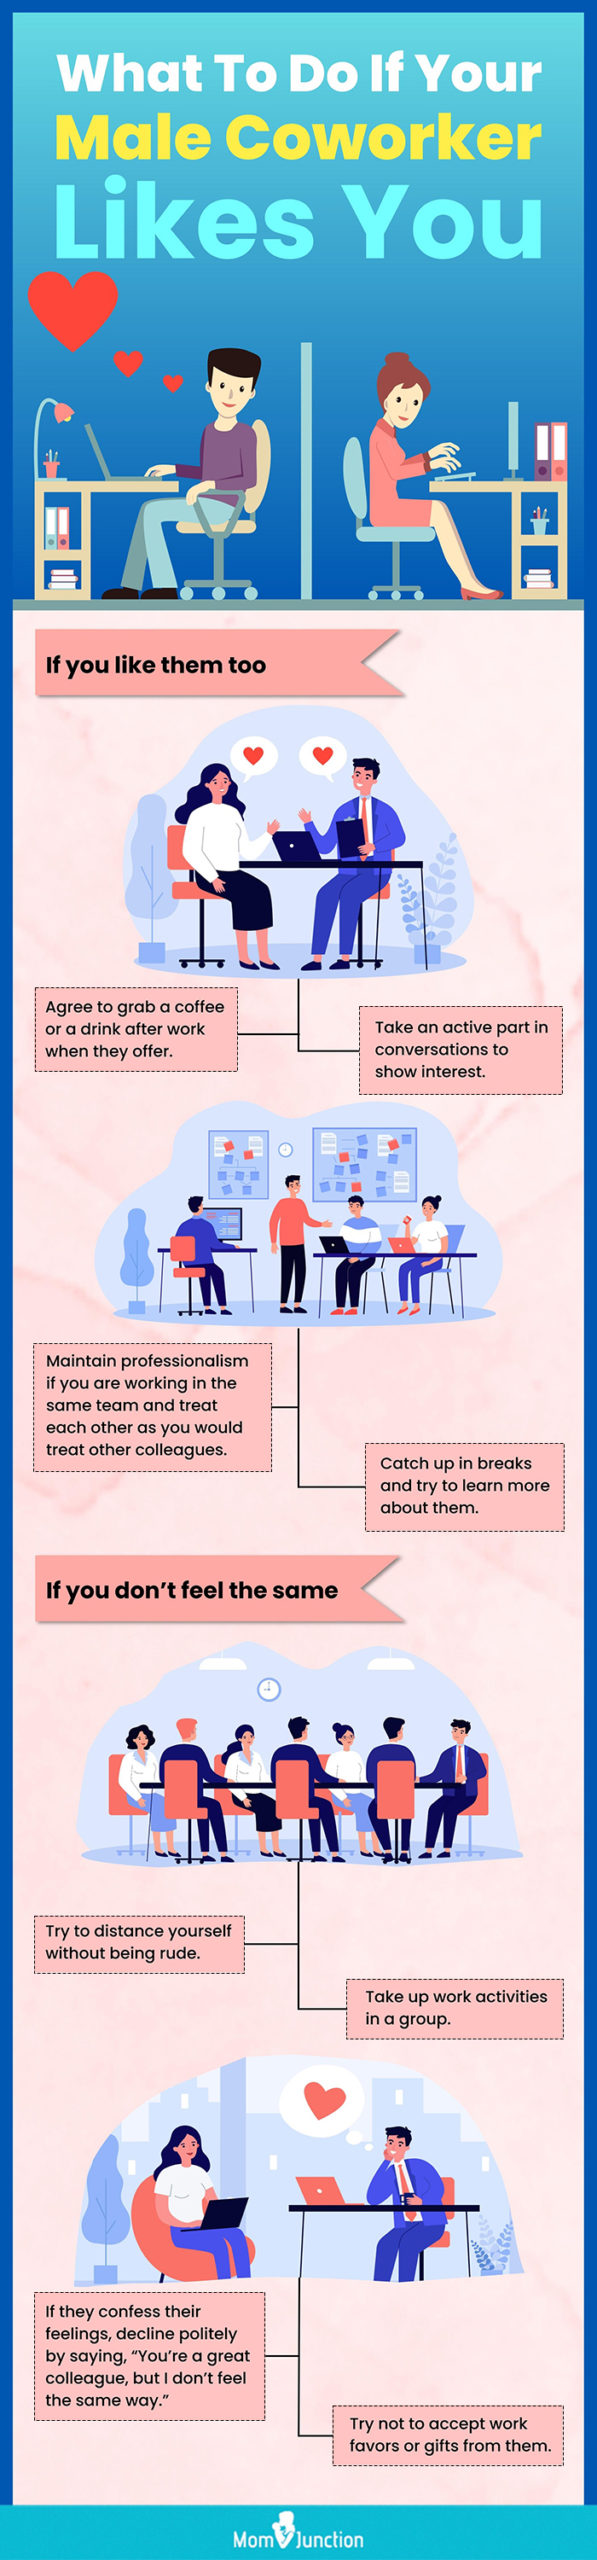 what to do if your male coworker likes you [infographic]